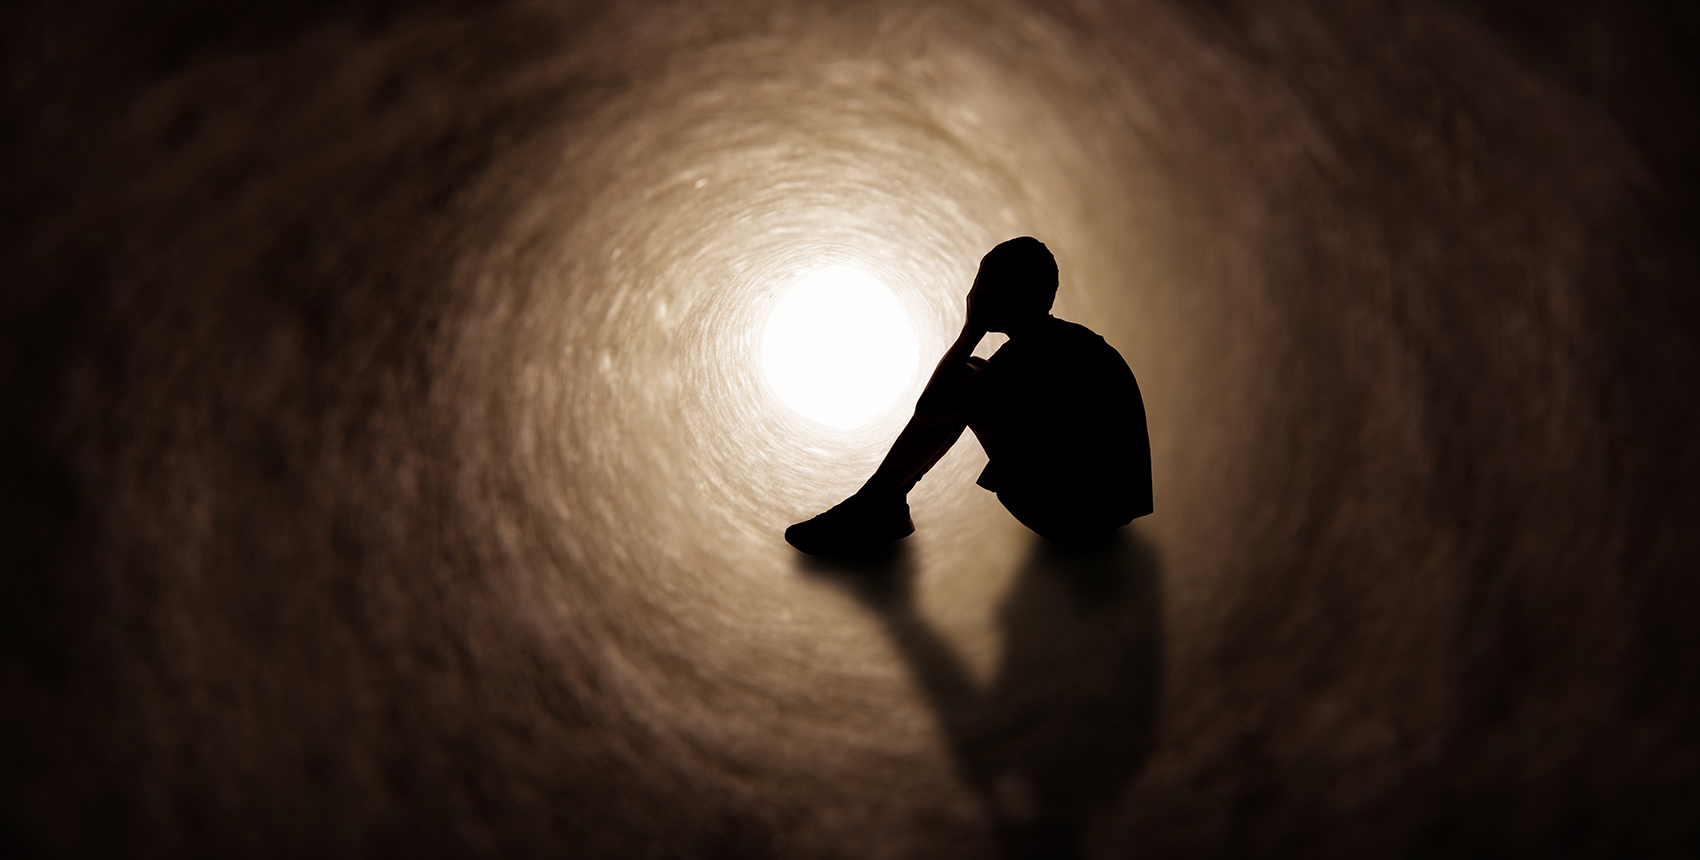 The silhouette of a young person in shorts and t-shirt covering their face as they sit in a dark tunnel.